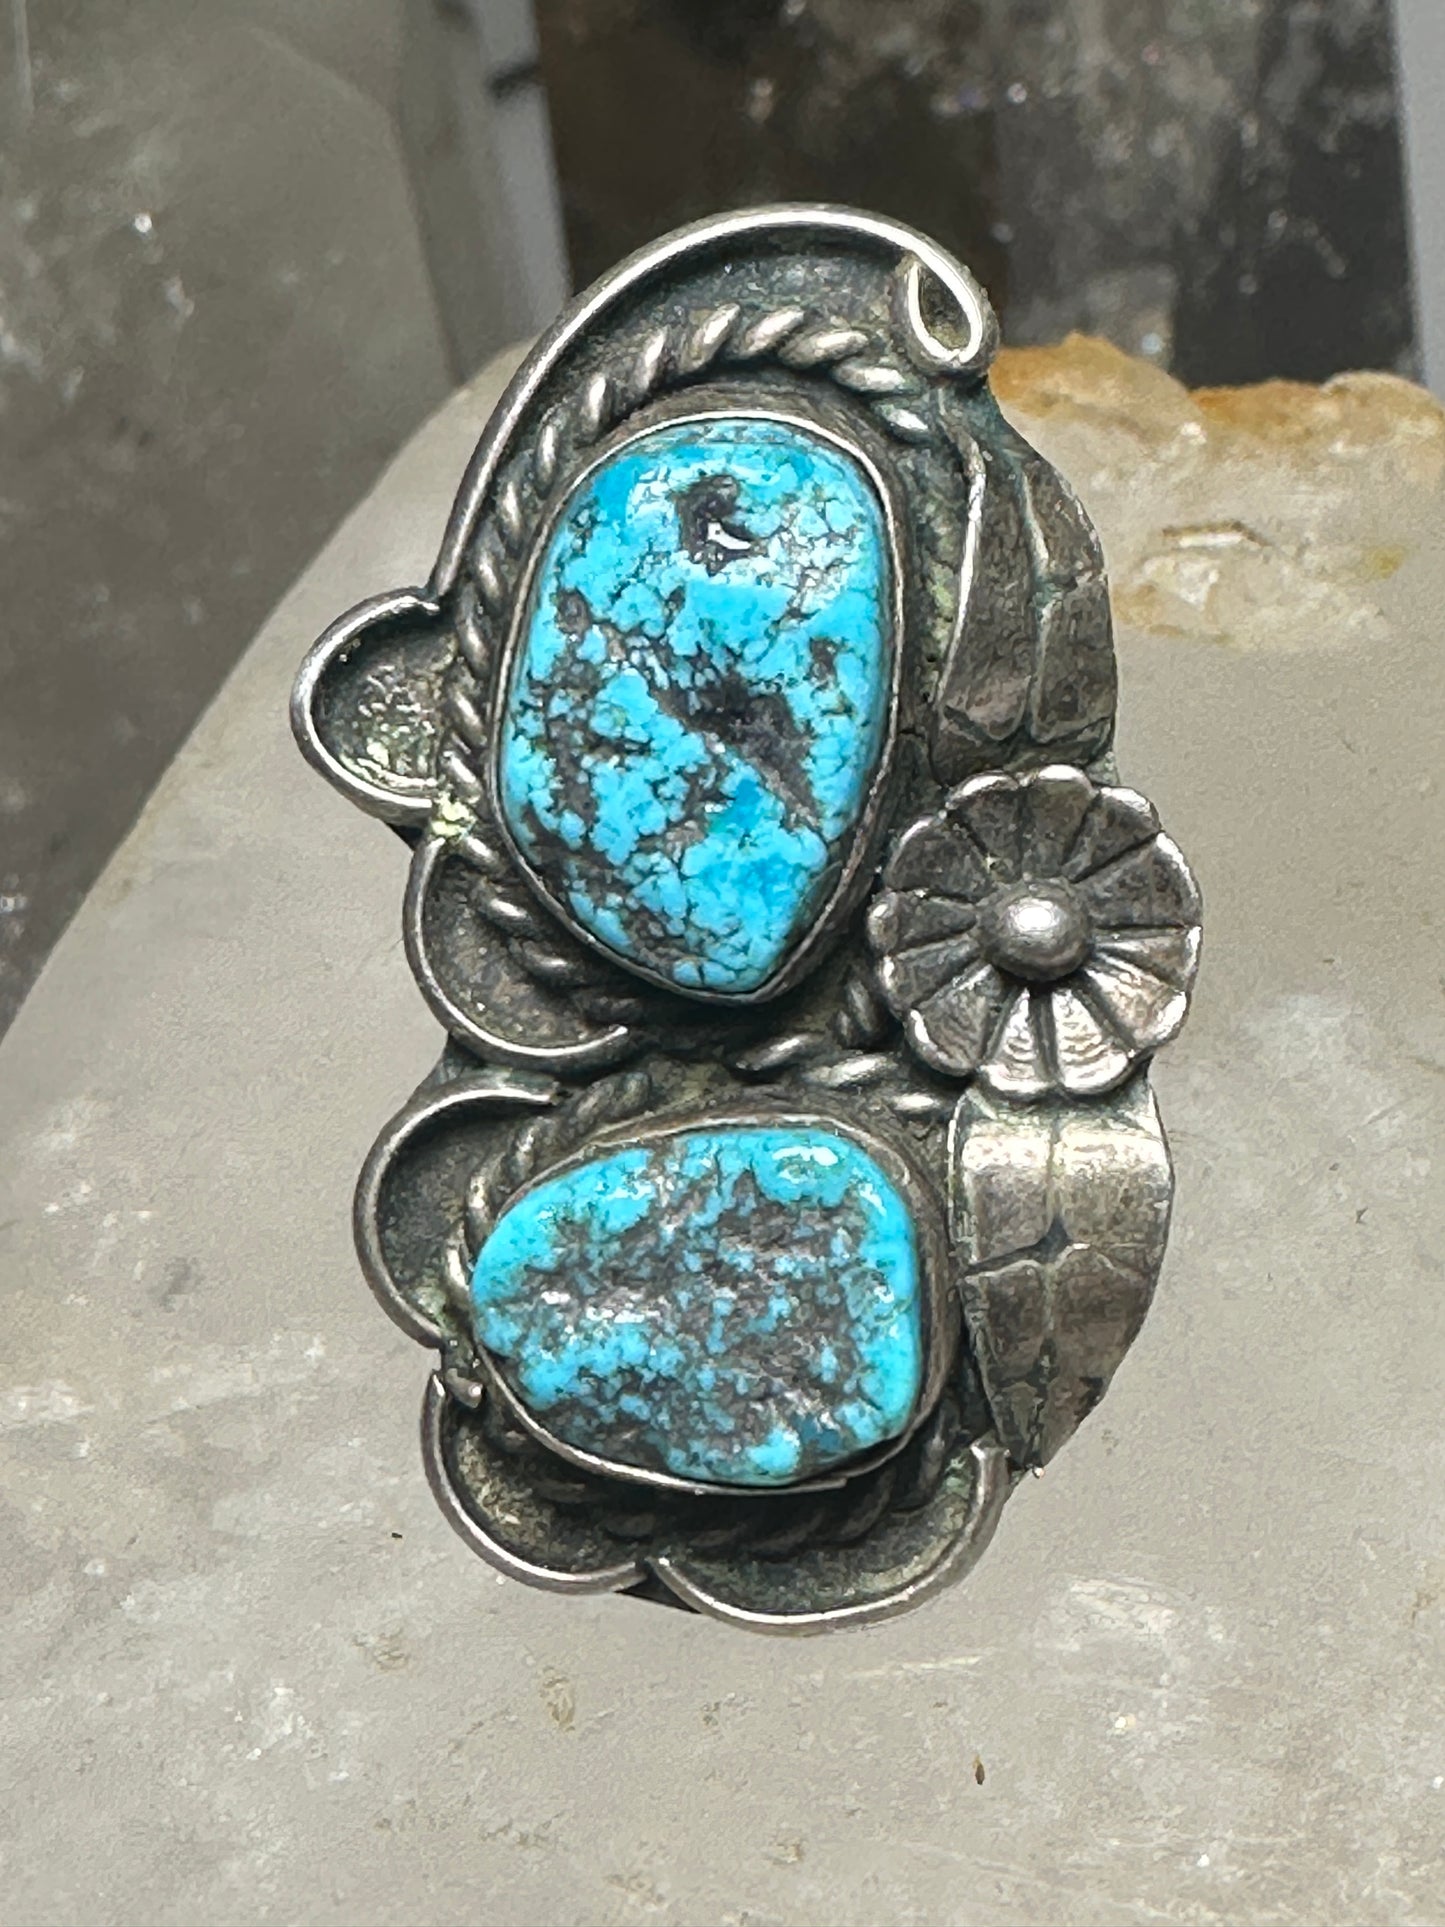 Turquoise ring size 7 Navajo squash blossom design southwest long sterling silver  women